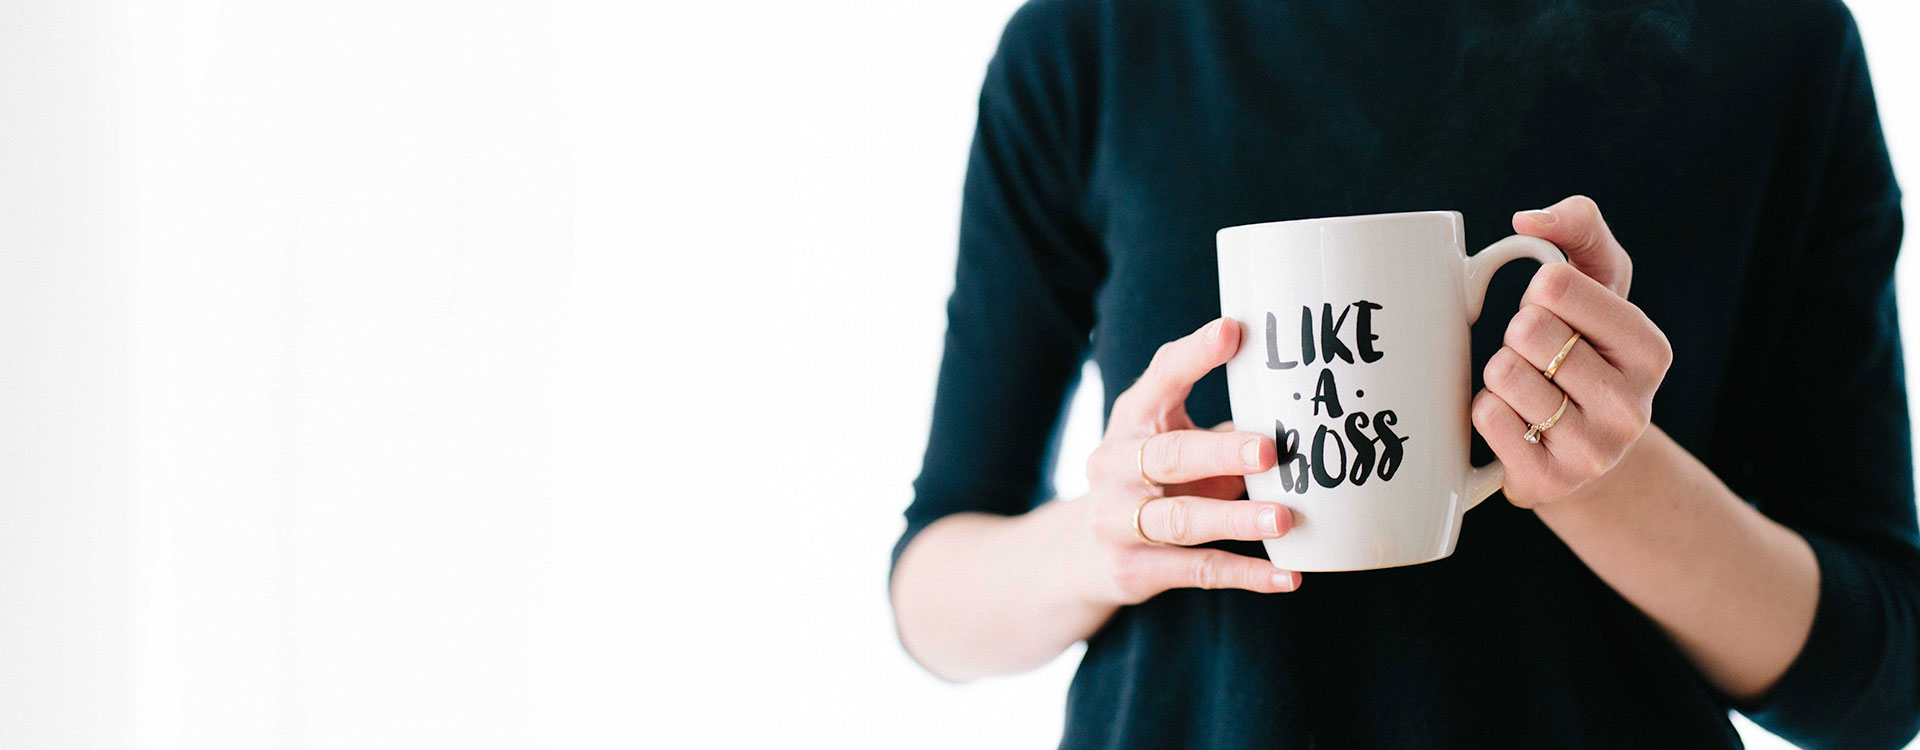 We see female hands holding a mug with the words "like a boss" written on them